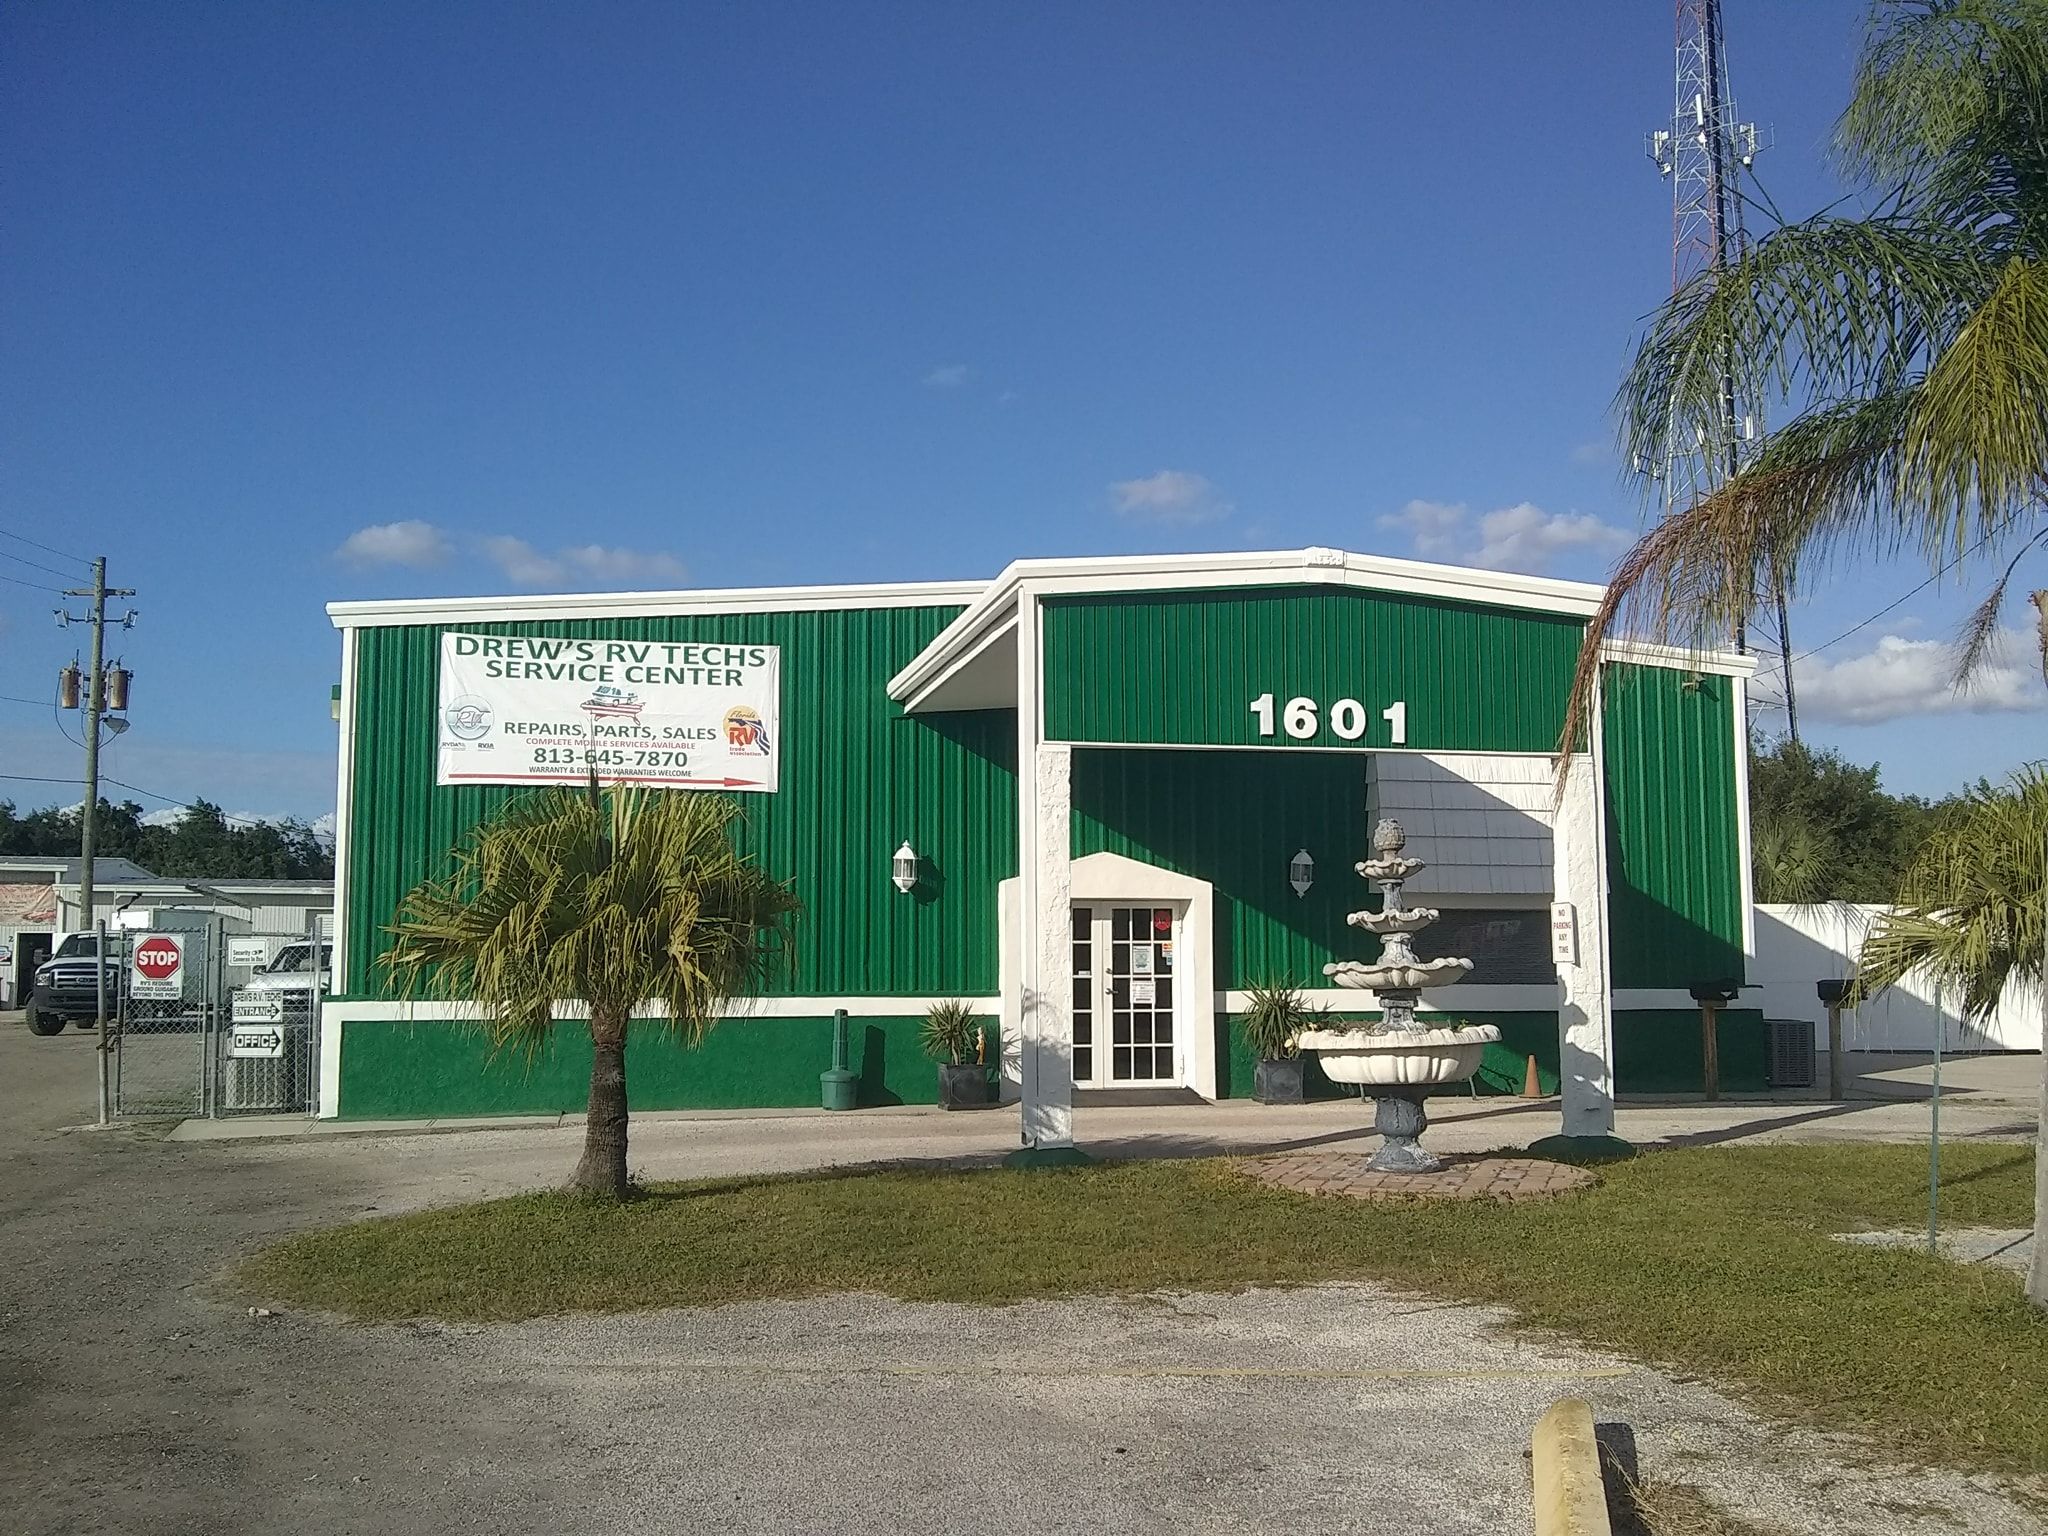 Services & Products Drew's RV Techs in Ruskin FL